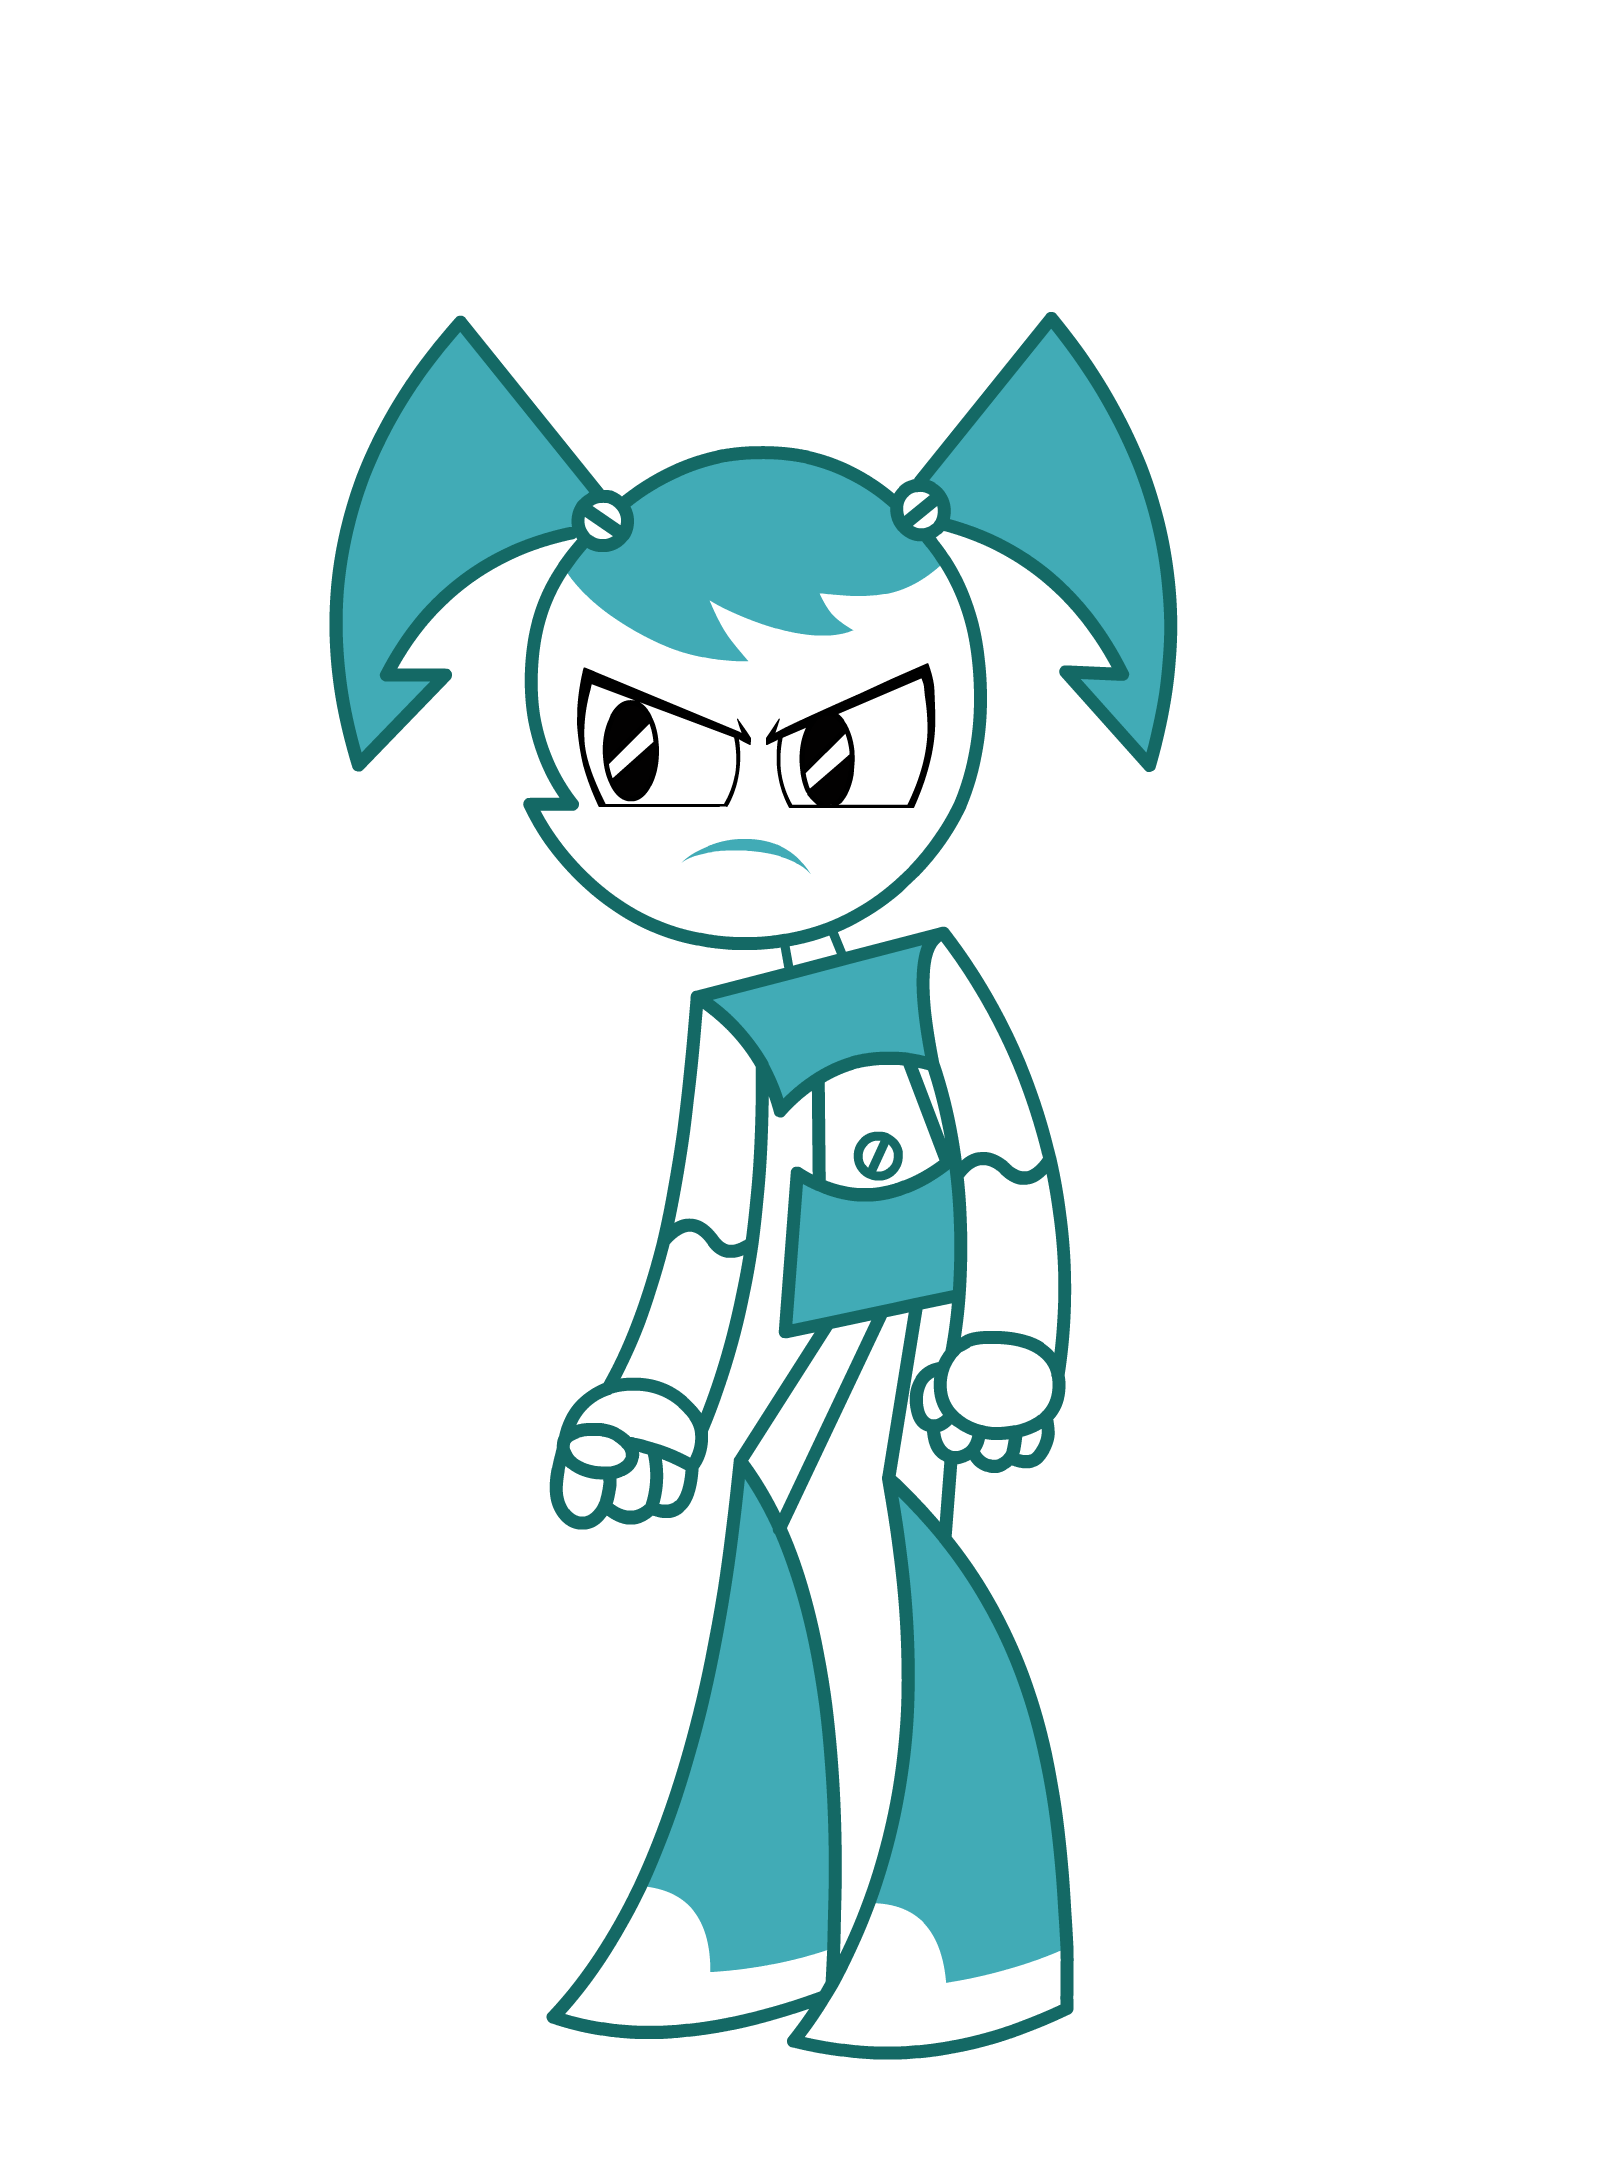 Jenny Xj9 Angry Related Keywords & Suggestions - Jenny Xj9 A